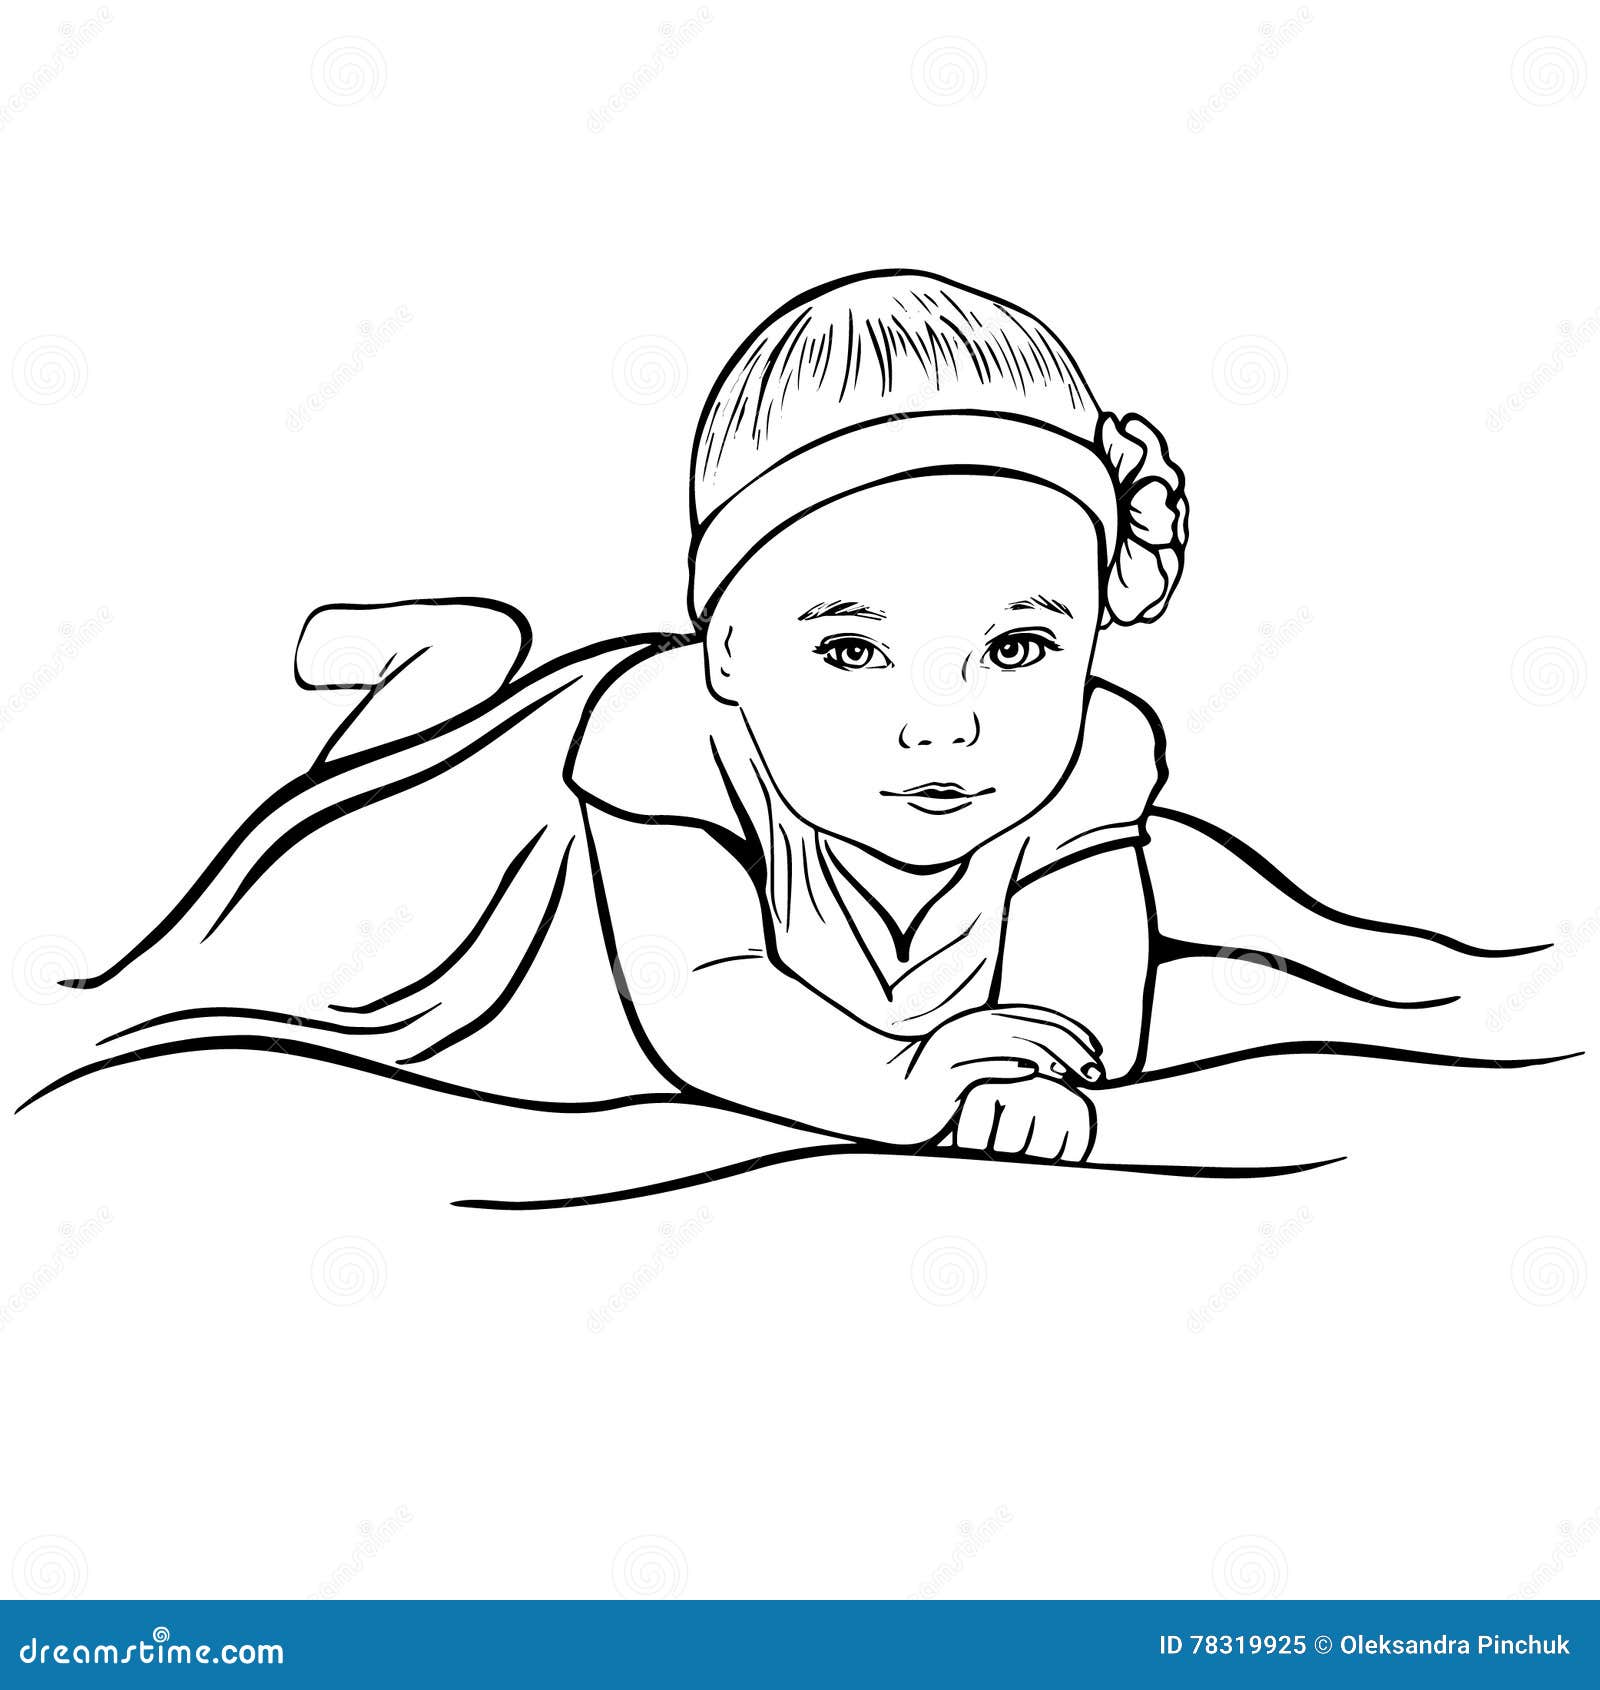 Draw A Baby Playing, HD Png Download , Transparent Png Image - PNGitem